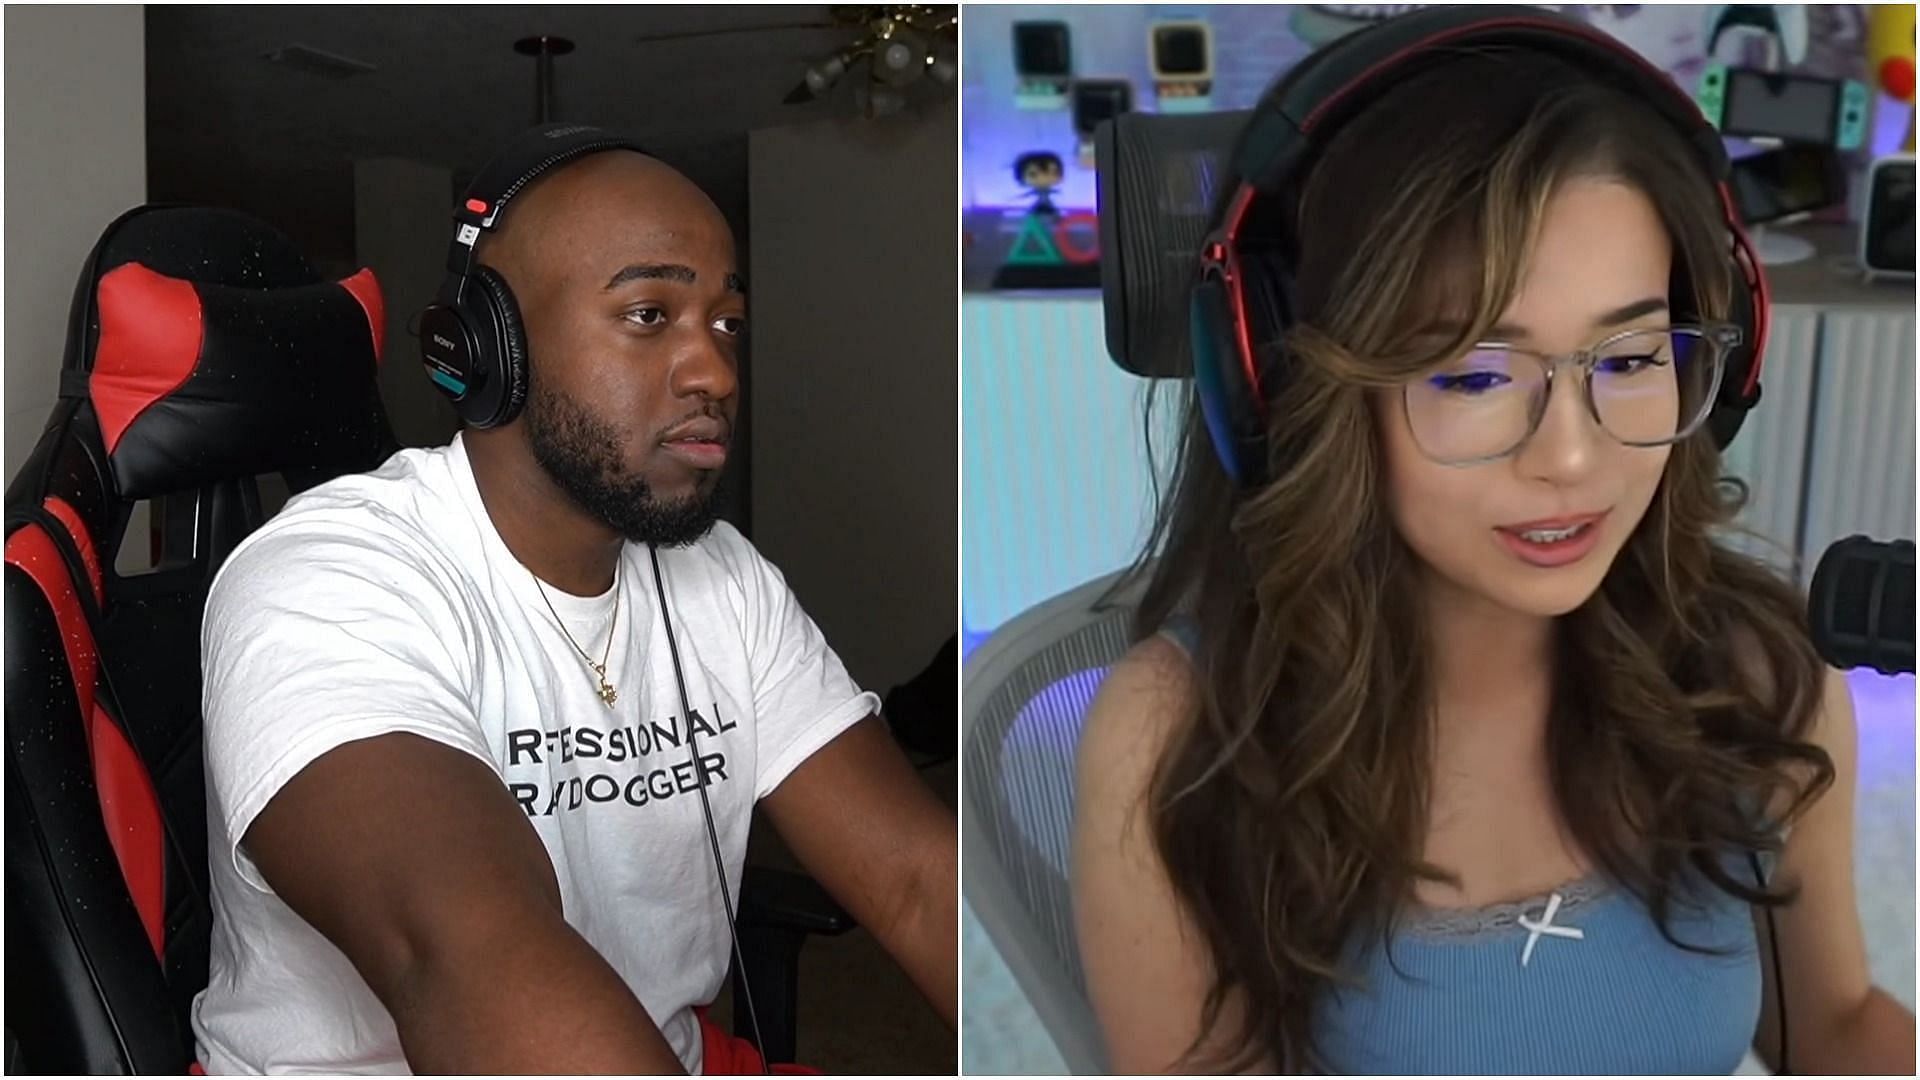  Currently, JiDion has 3.59 million subscribers on YouTube (Image Pokimane/Twitch and JiDion/YouTube)